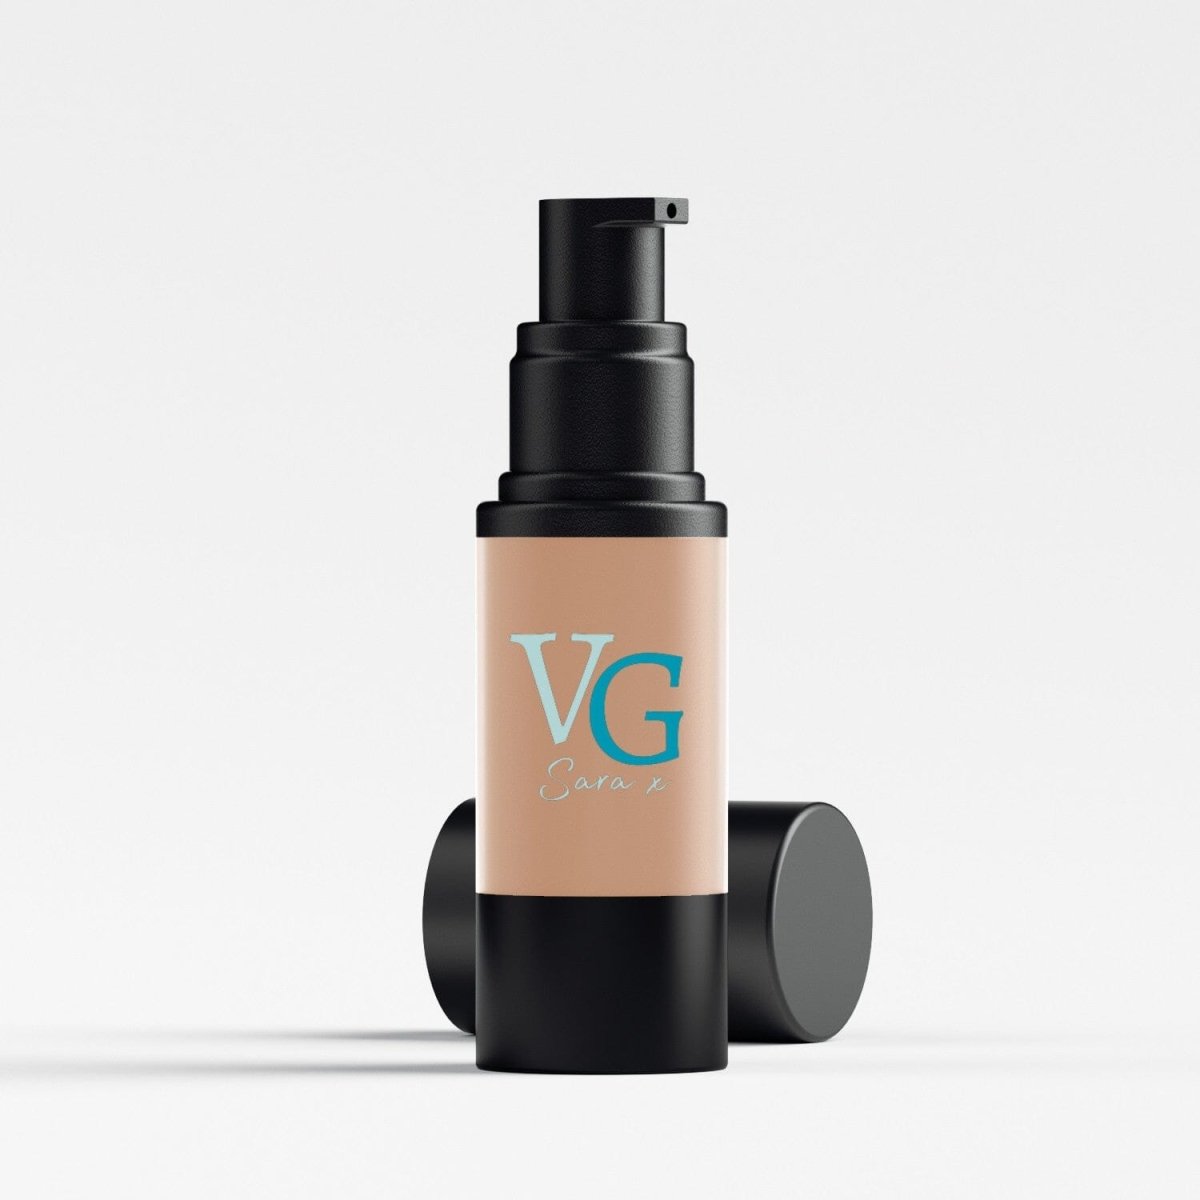 Cruelty-Free BB Cream in a bottle from VG Cosmetics